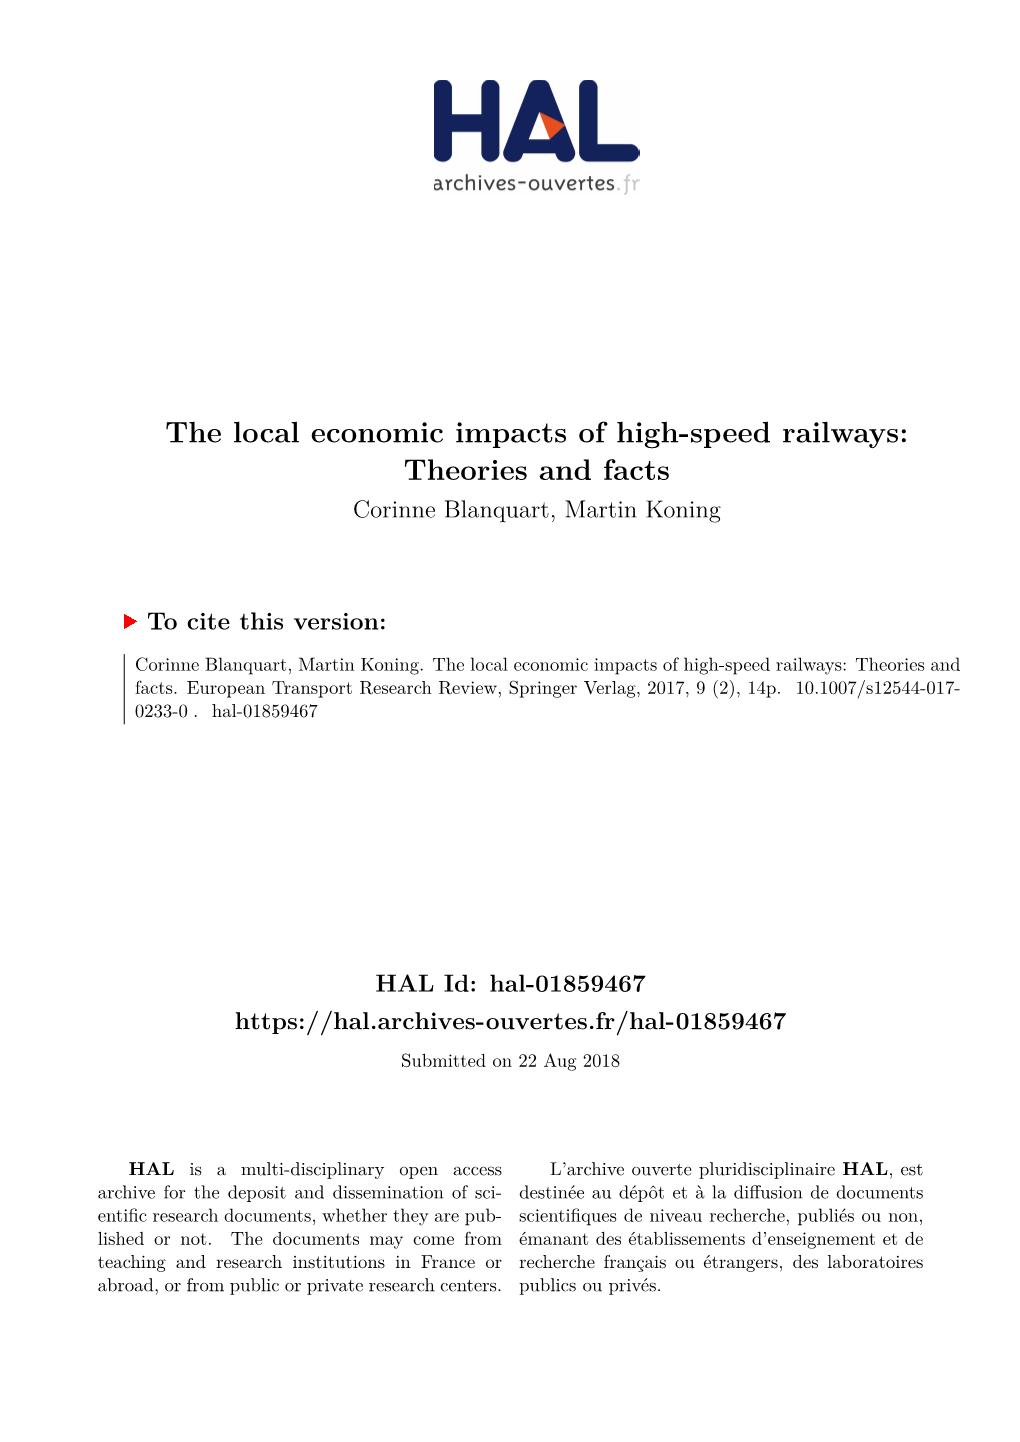 The Local Economic Impacts of High-Speed Railways: Theories and Facts Corinne Blanquart, Martin Koning